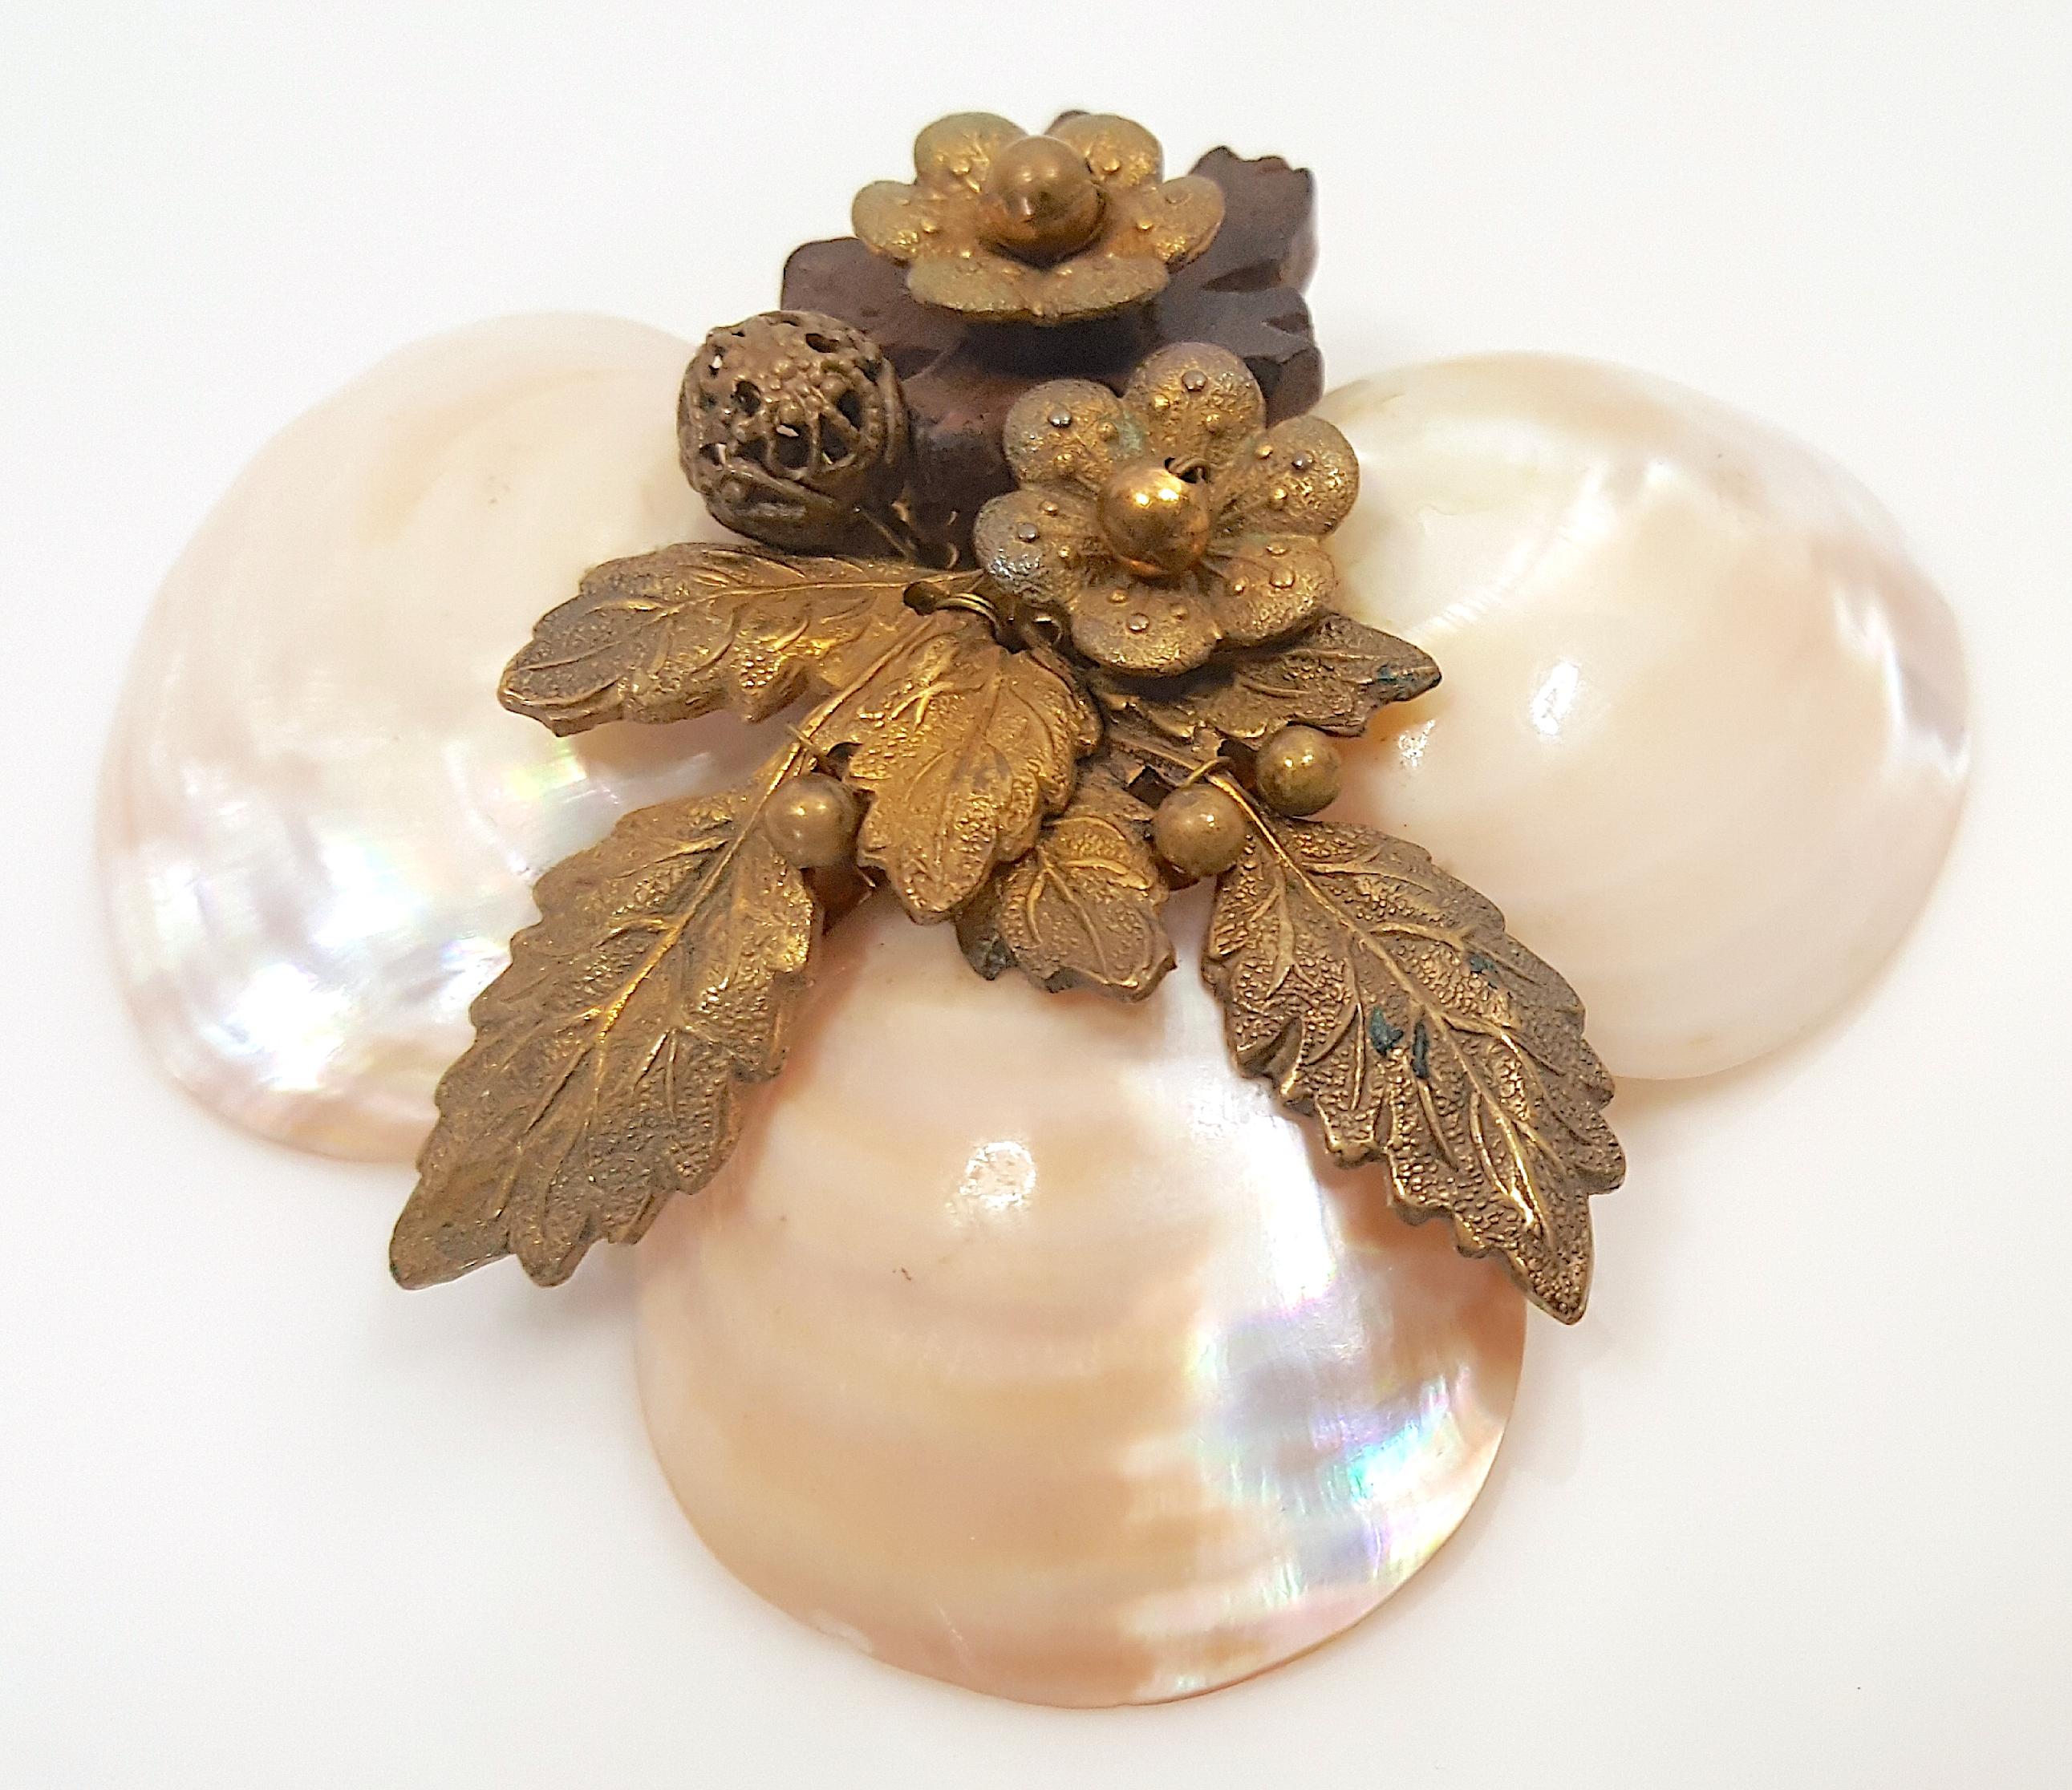 Baroque Revival MiriamHaskell 1930s FrankHess TripleSeashell RussianGilt Flora WoodLeaf Brooch For Sale